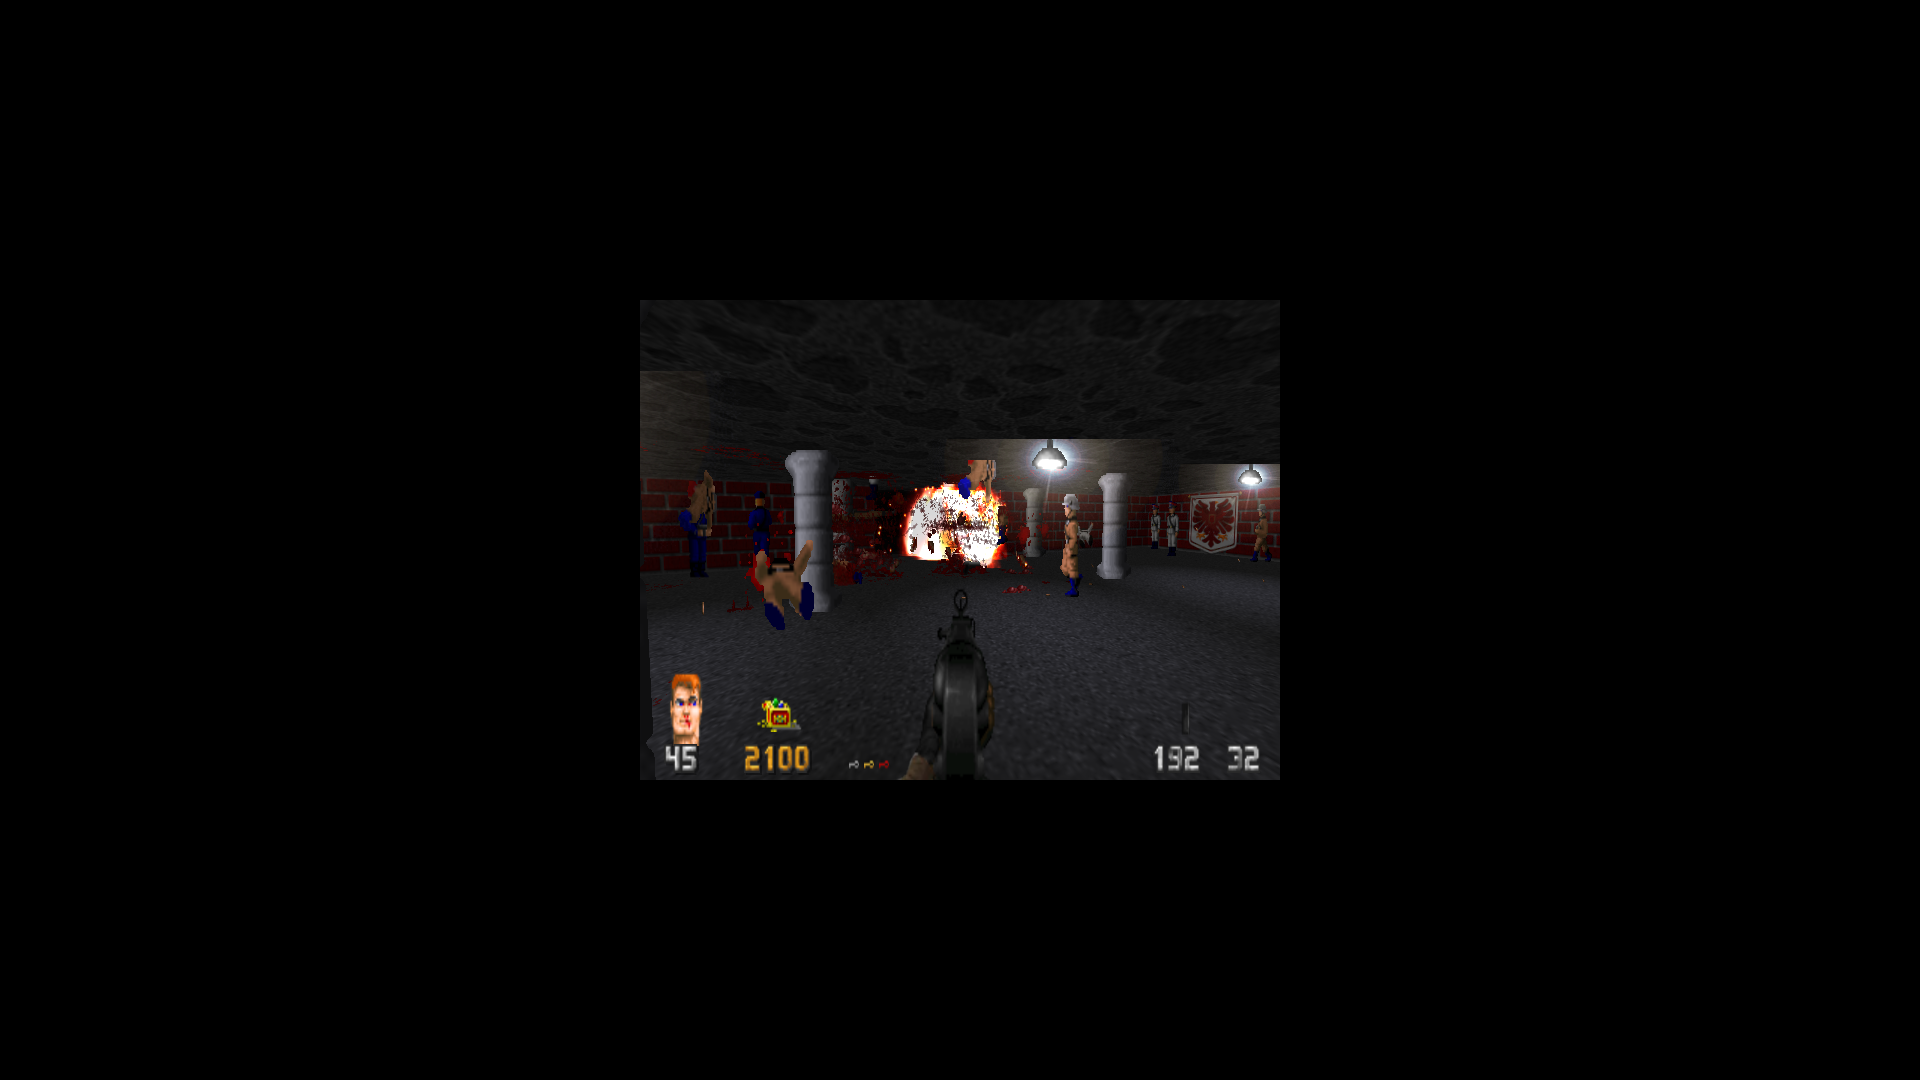 What If Five Nights at Freddy's 2 Was Recreated in the Doom Engine